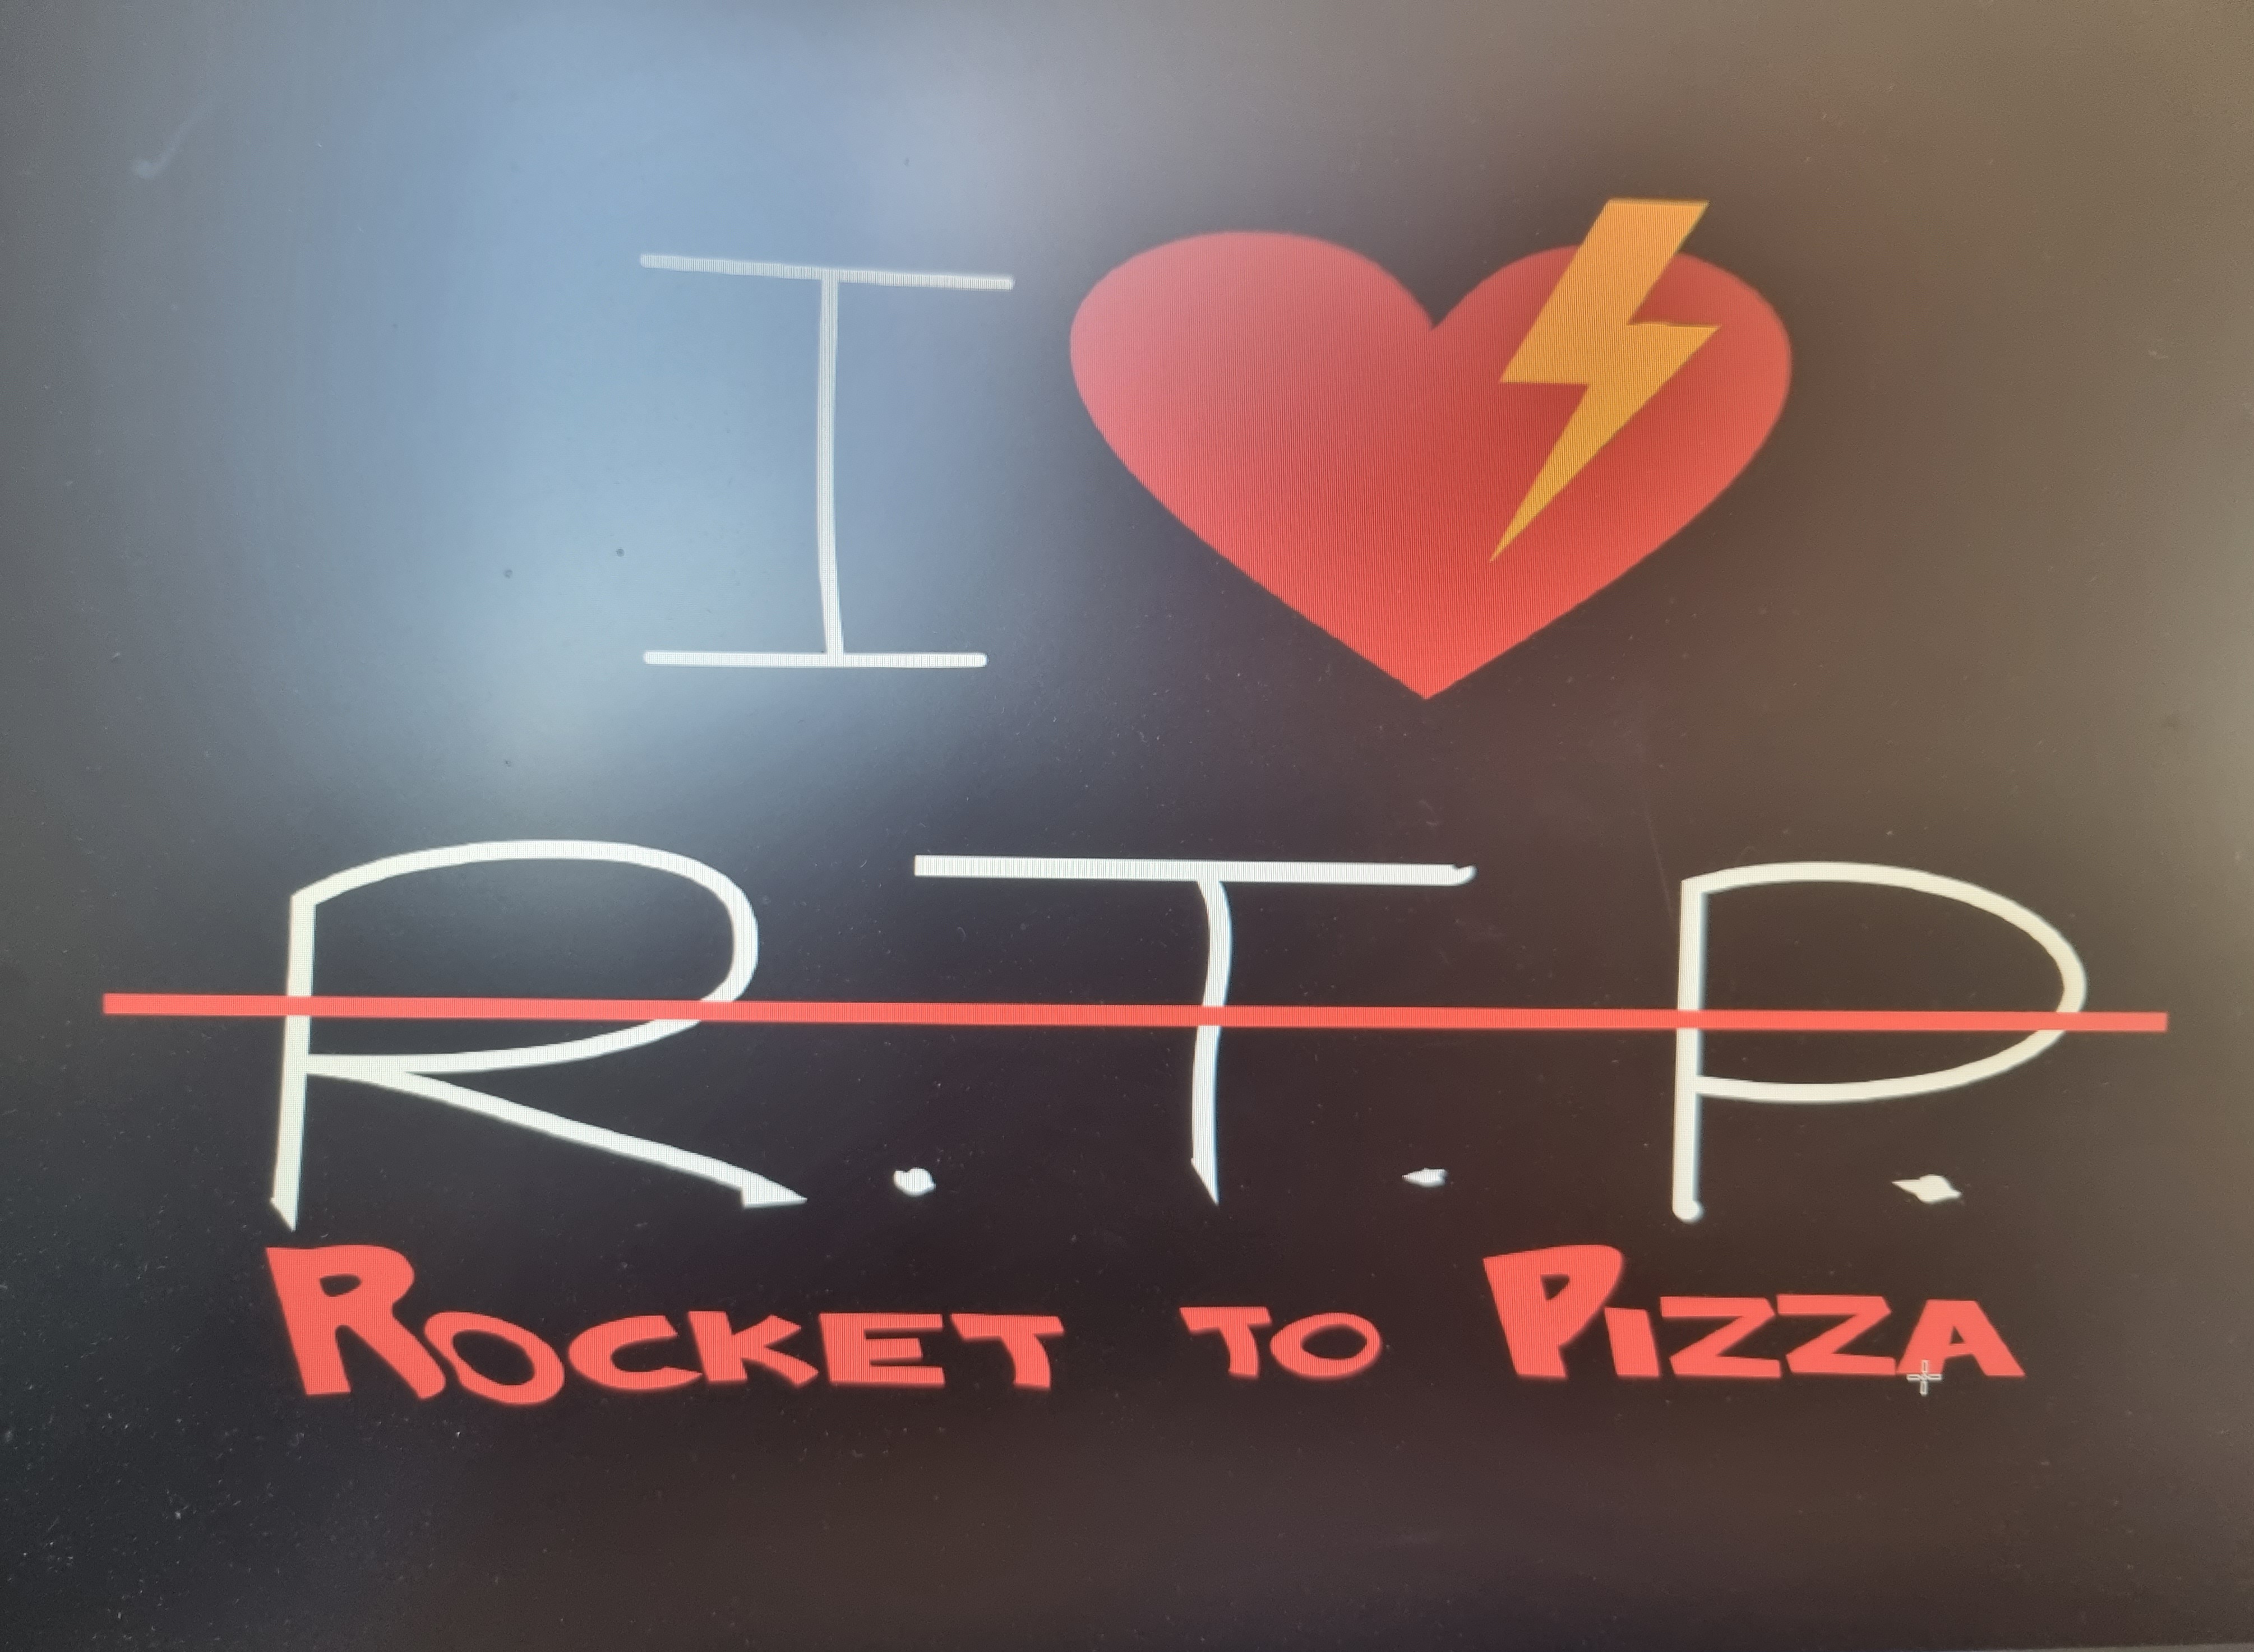 ROCKET TO PIZZA